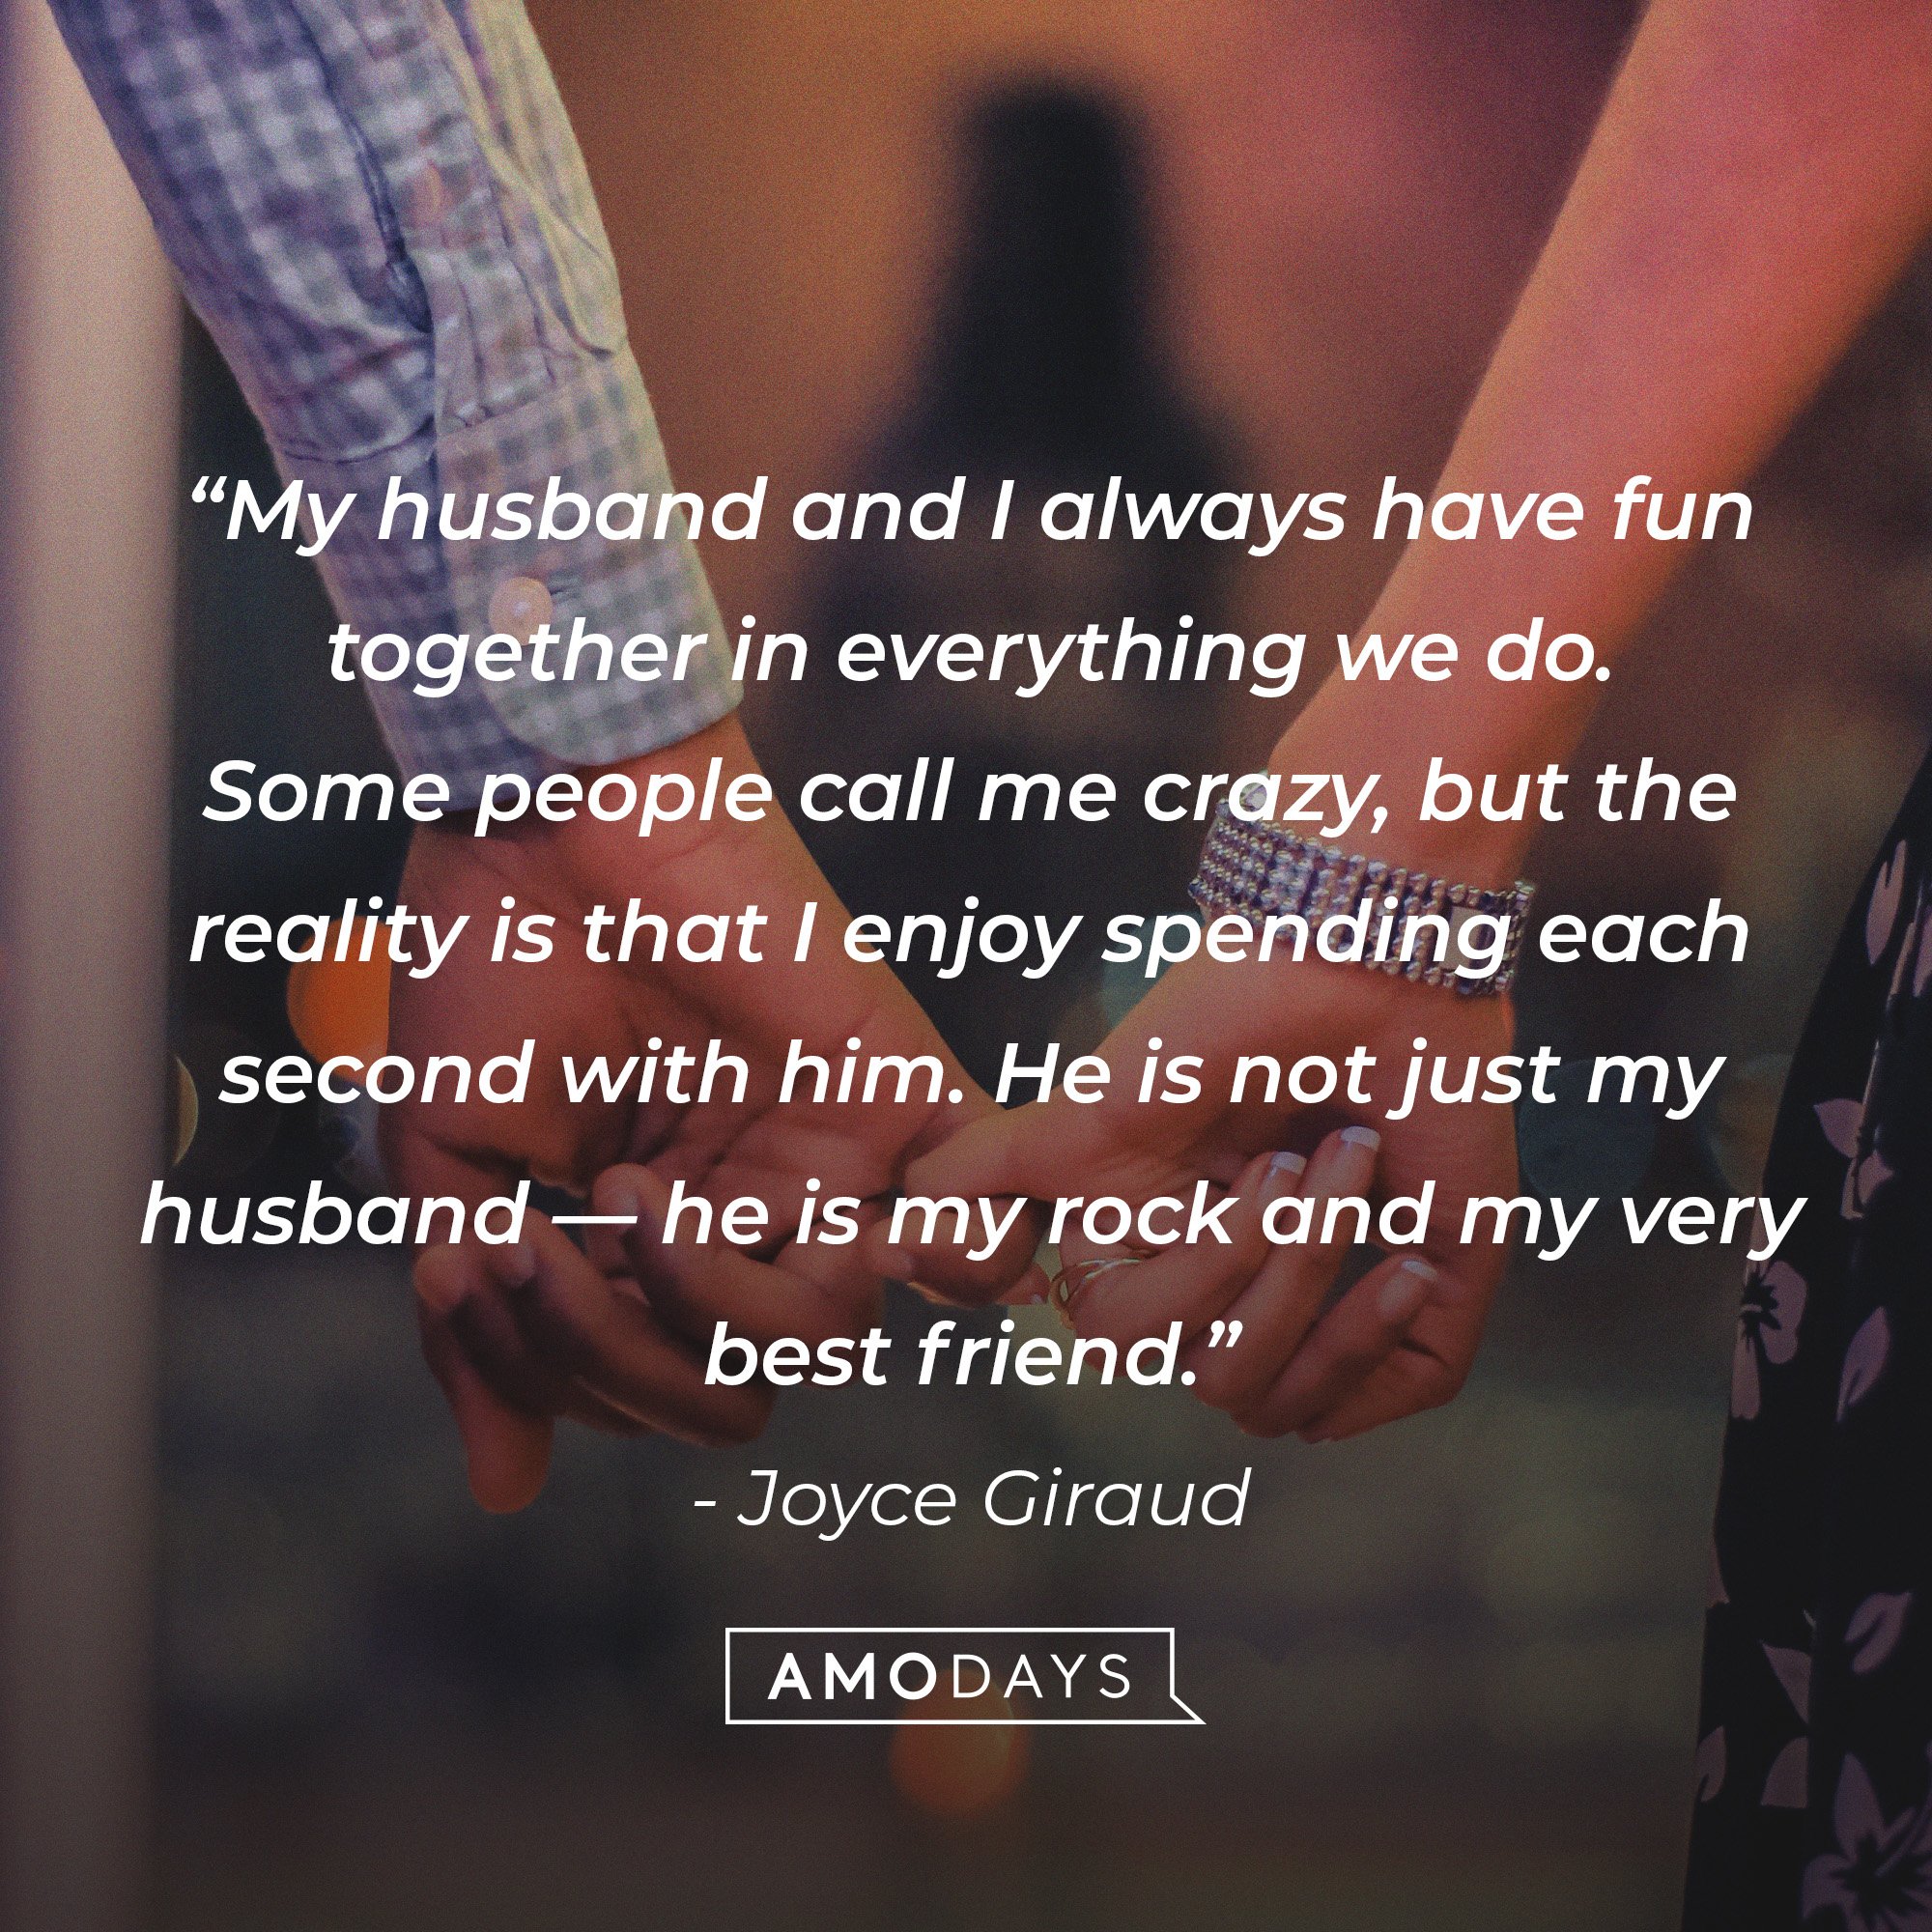  Joyce Giraud's: “My husband and I always have fun together in everything we do. Some people call me crazy, but the reality is that I enjoy spending each second with him. He is not just my husband — he is my rock and my very best friend.” — Image: AmoDays